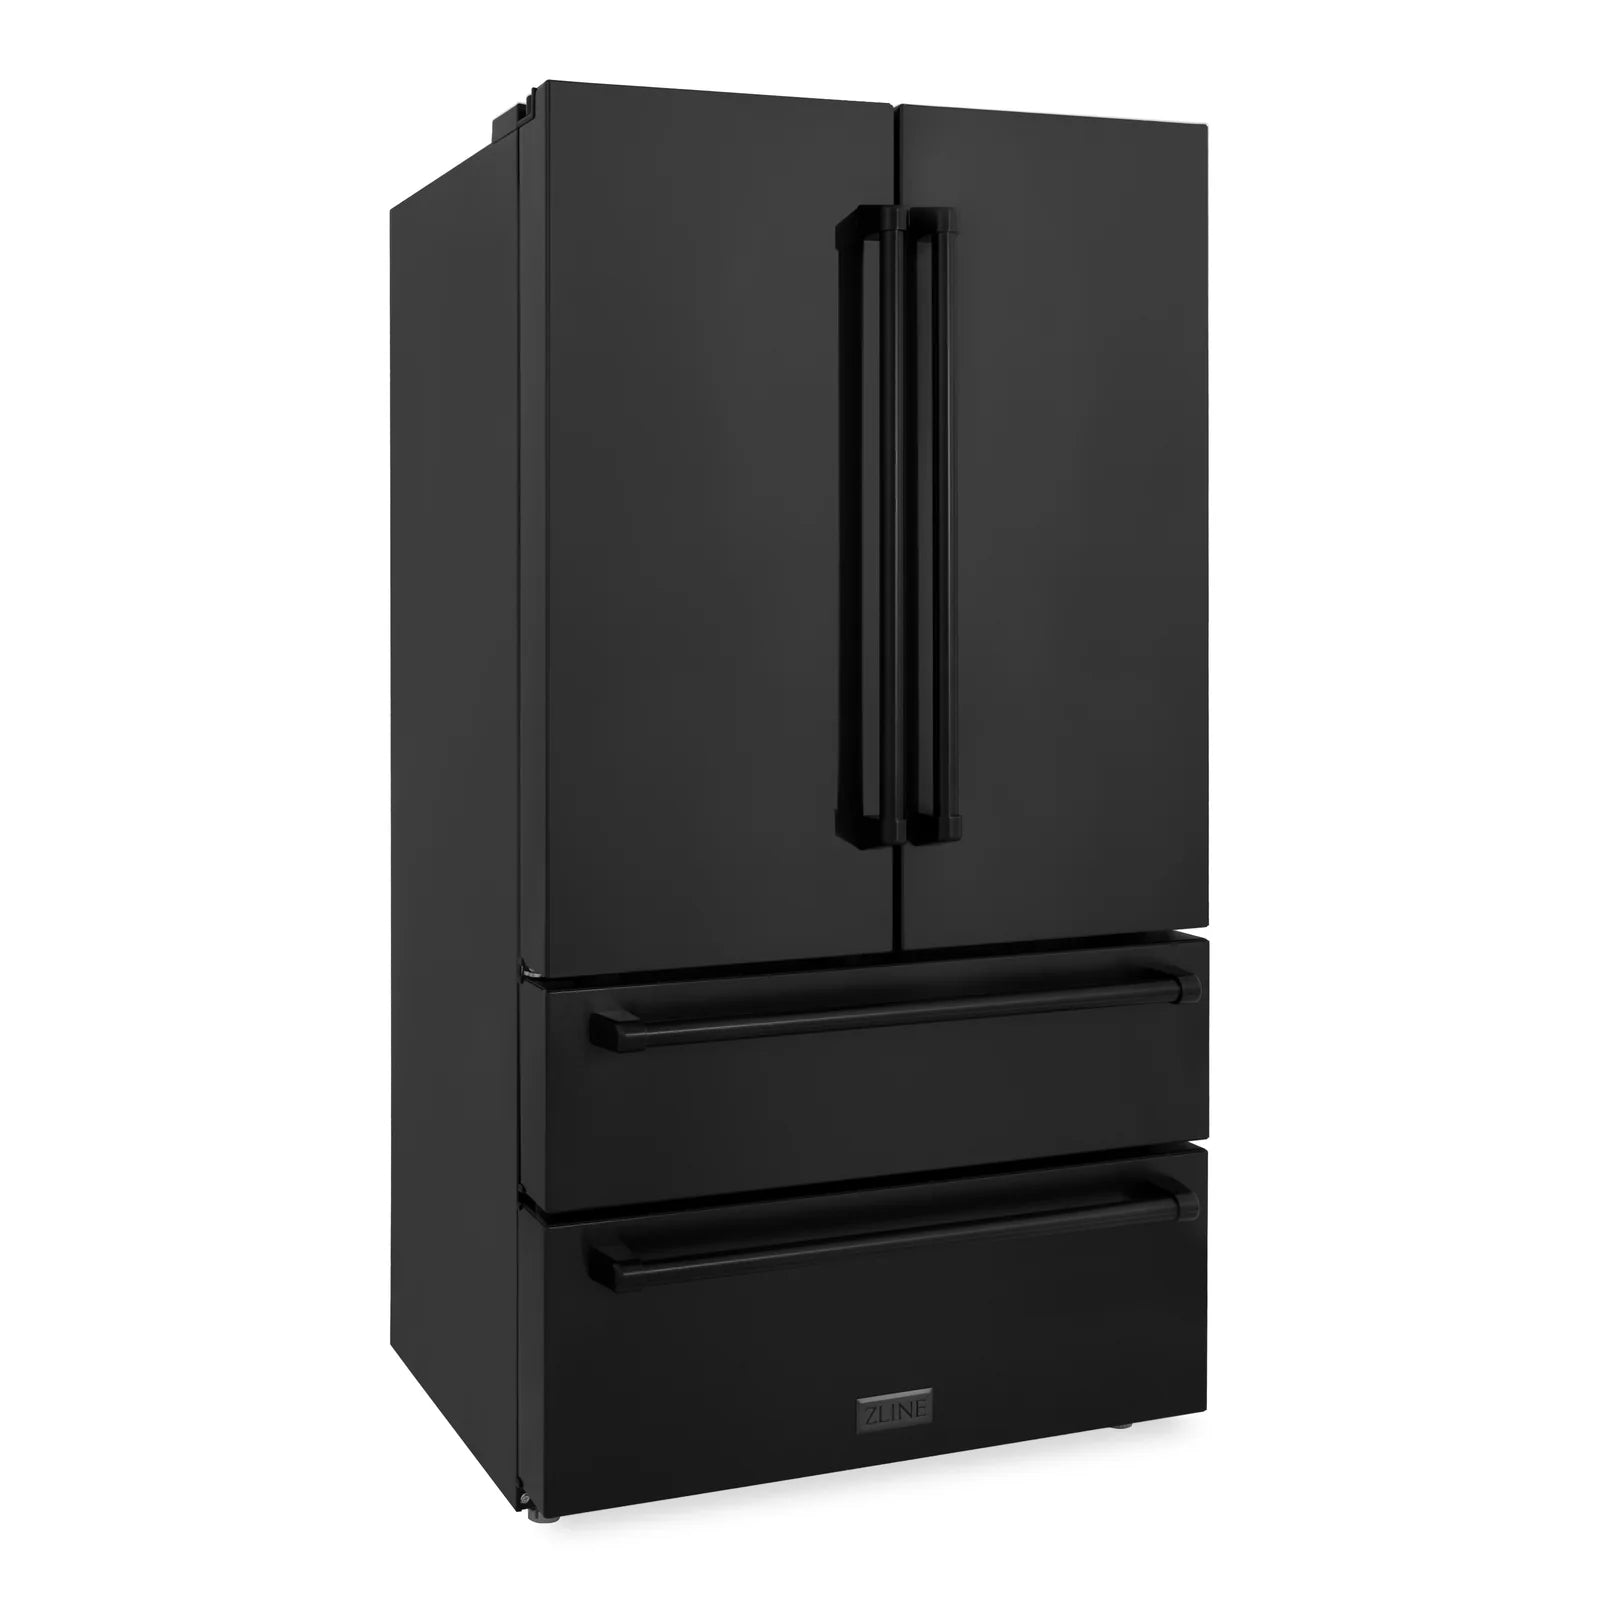 ZLINE 36-Inch 22.5 cu. ft Freestanding French Door Refrigerator with Ice Maker and Water Filter in Fingerprint Resistant Black Stainless Steel - RFM-36-WF-BS